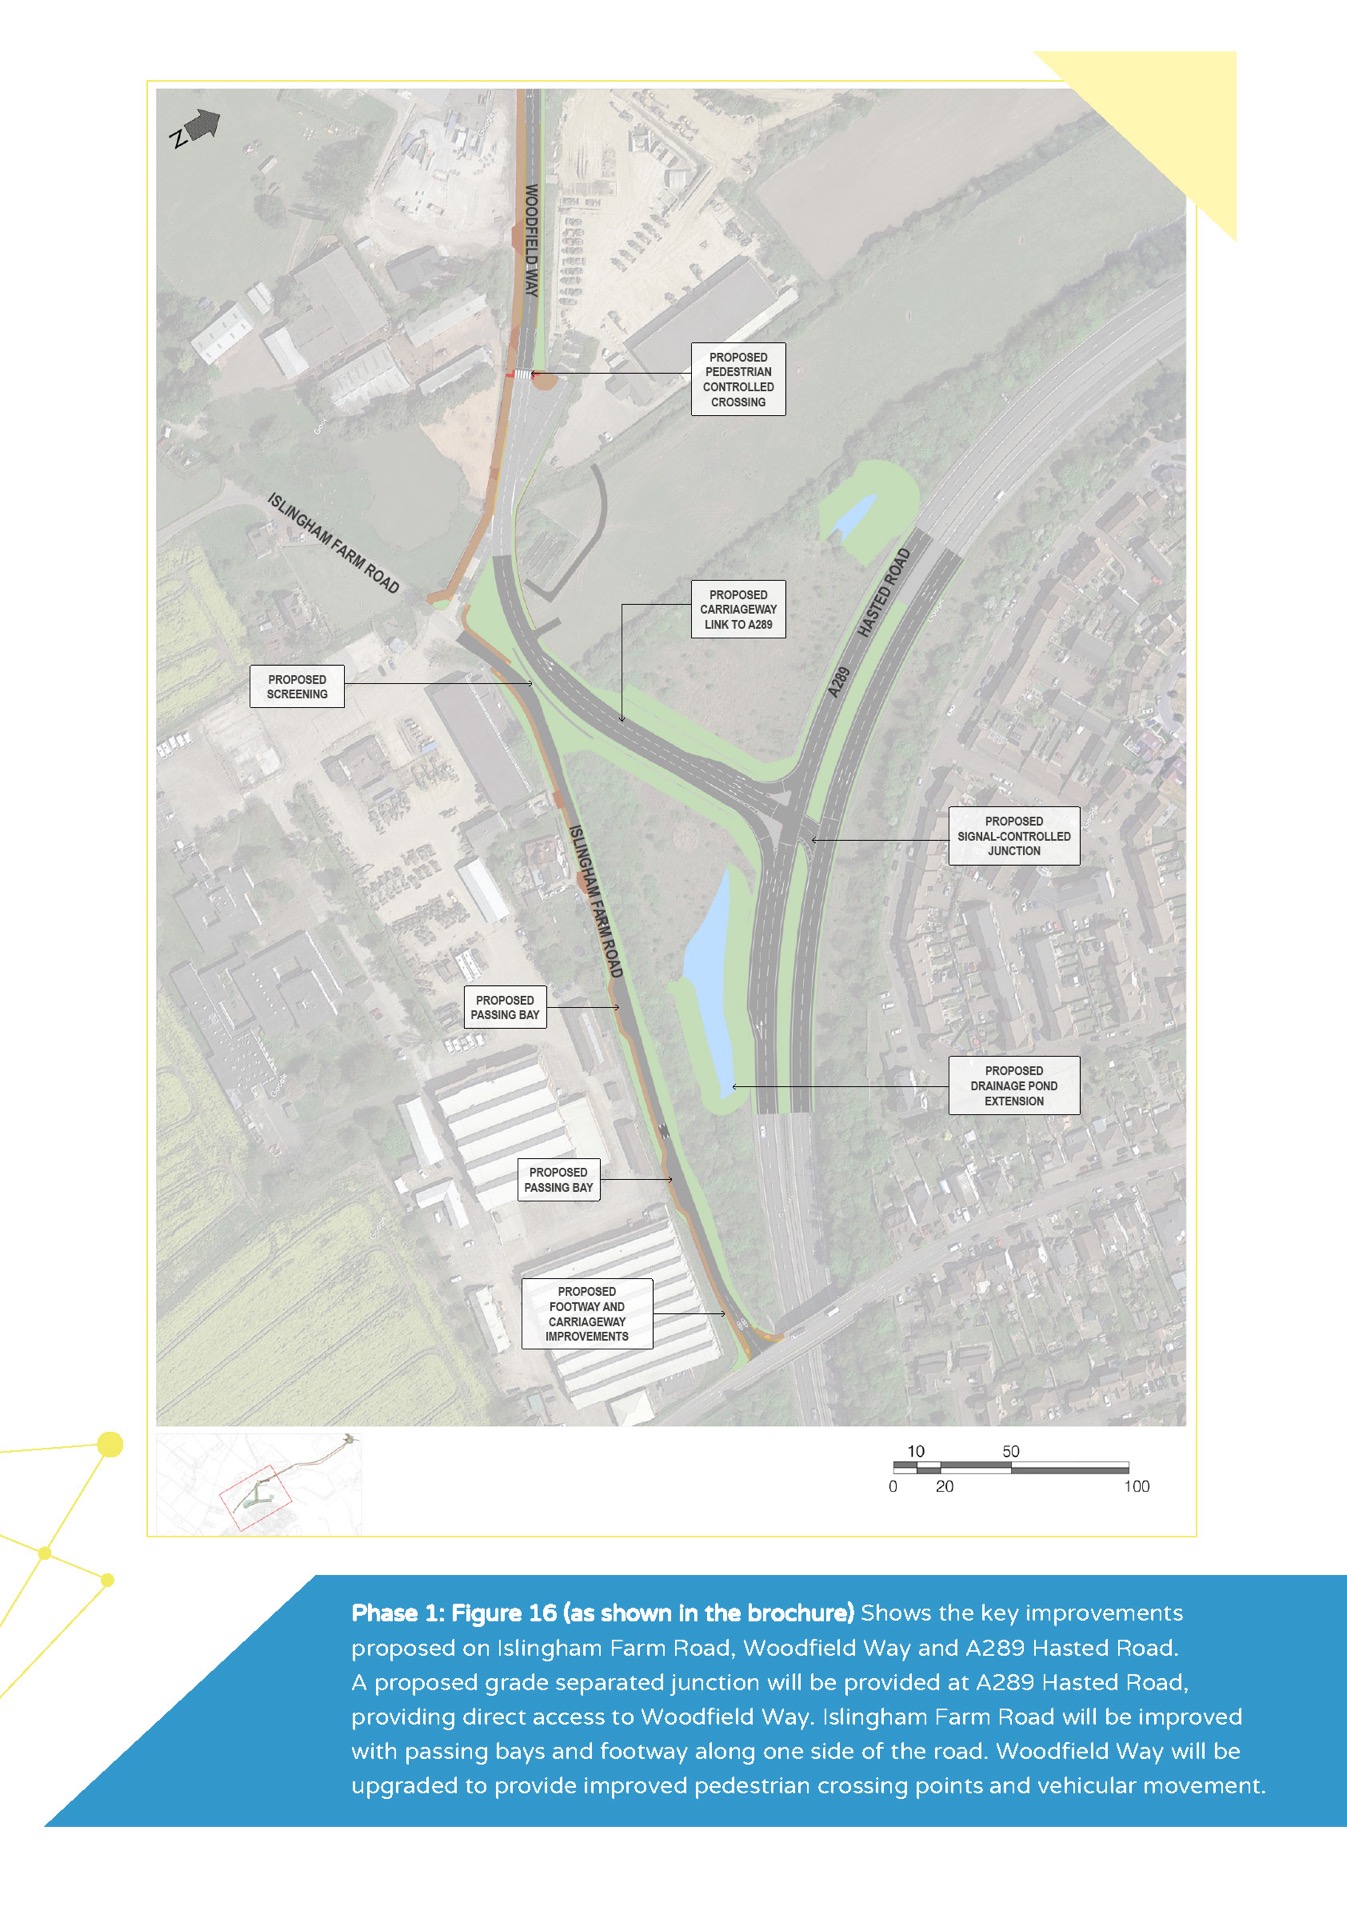 The key improvements proposed on Islingham Farm Road, Woodfield Way and A289 Hasted Road